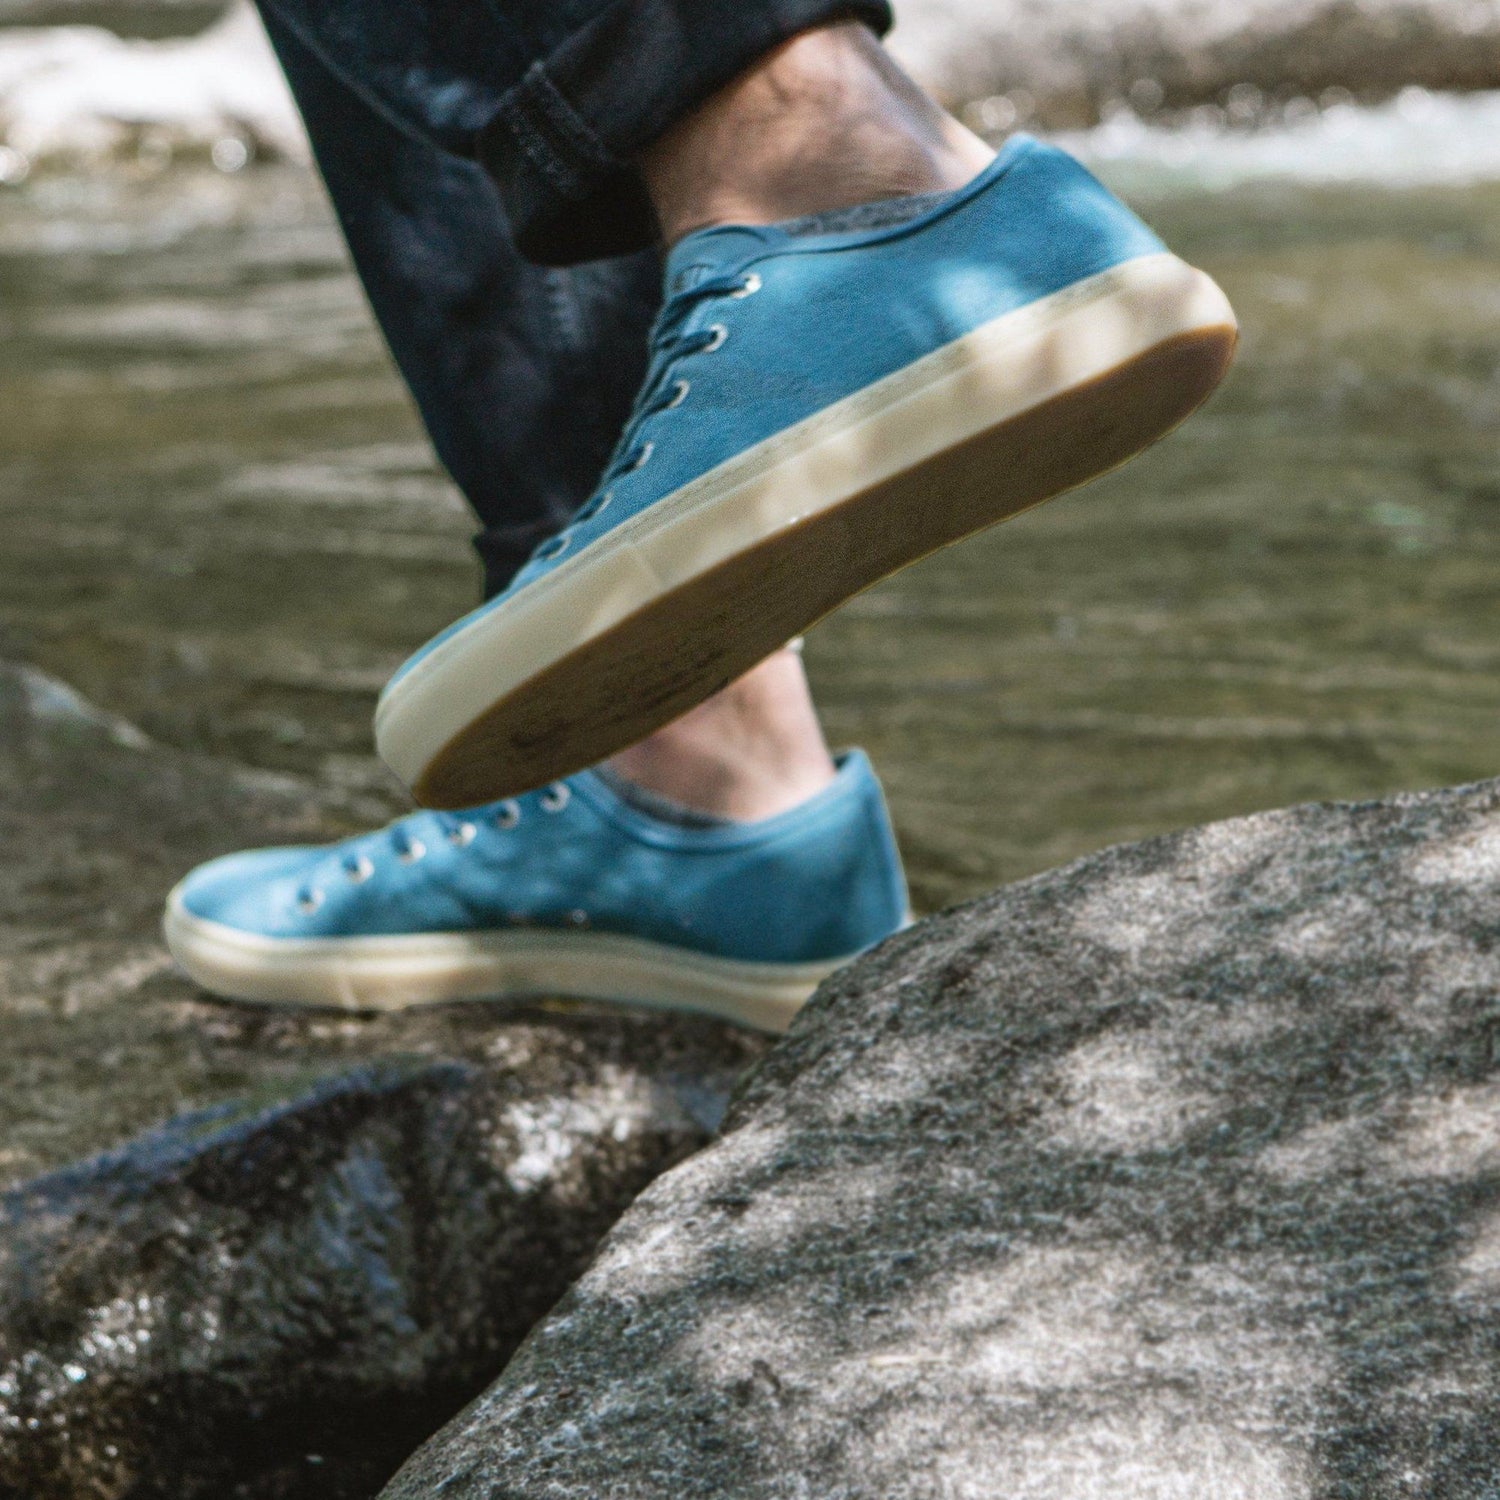 Langbrett SUM - Unisex Ecological Shoes - Made From Recycled Cotton Aqua Shoes